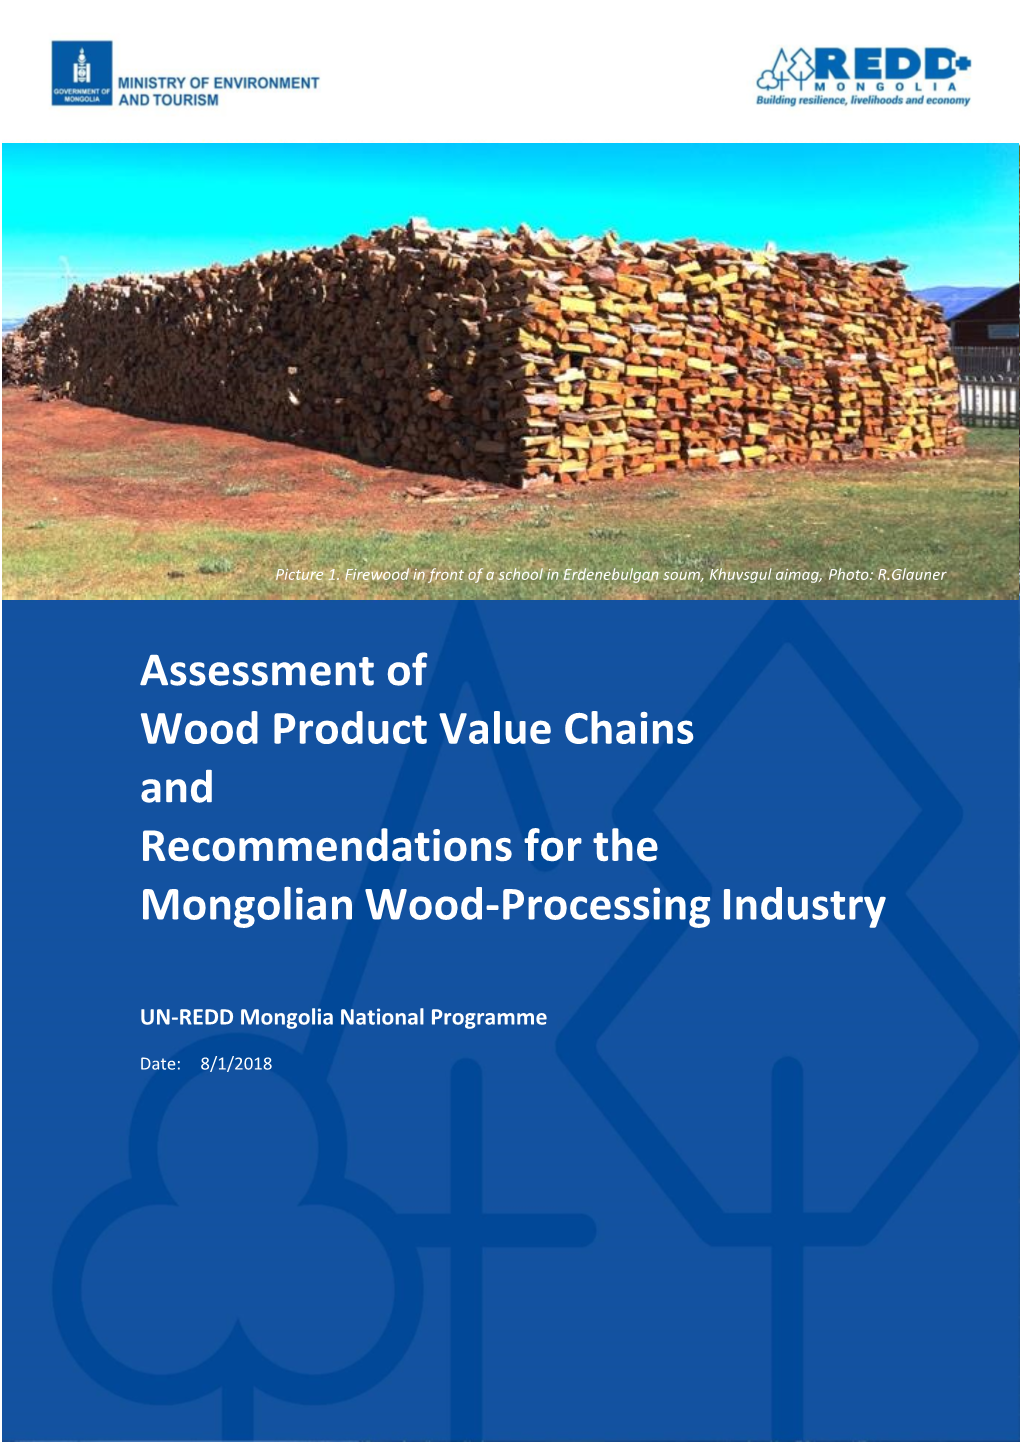 Assessment of Wood Product Value Chains and Recommendations for the Mongolian Wood-Processing Industry